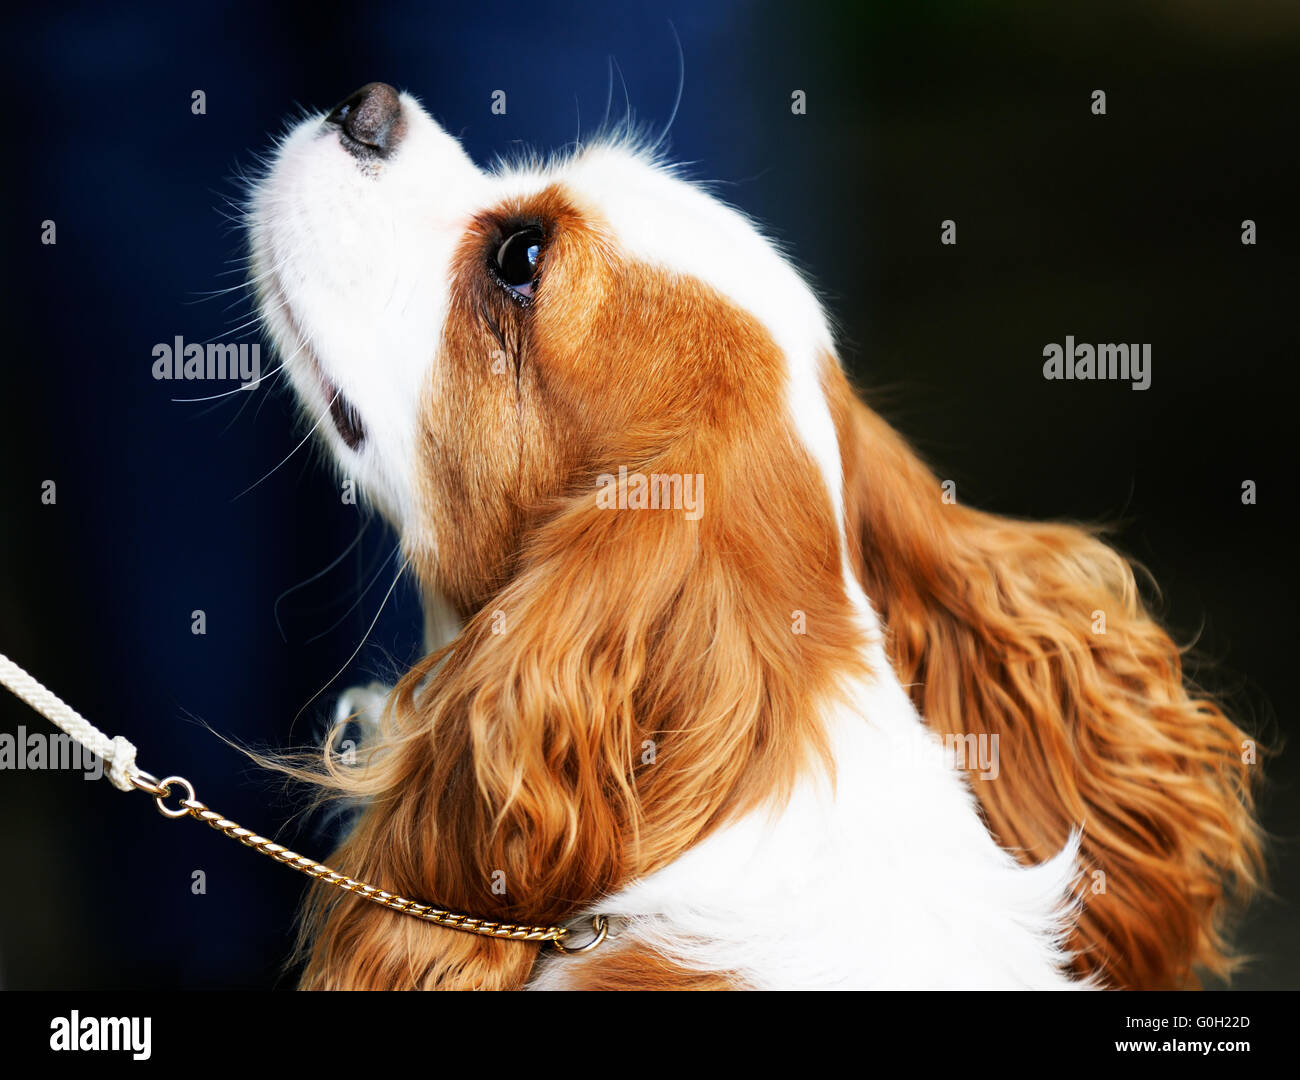 King Charles spaniel dog outdoor portrait over blurry background Stock Photo